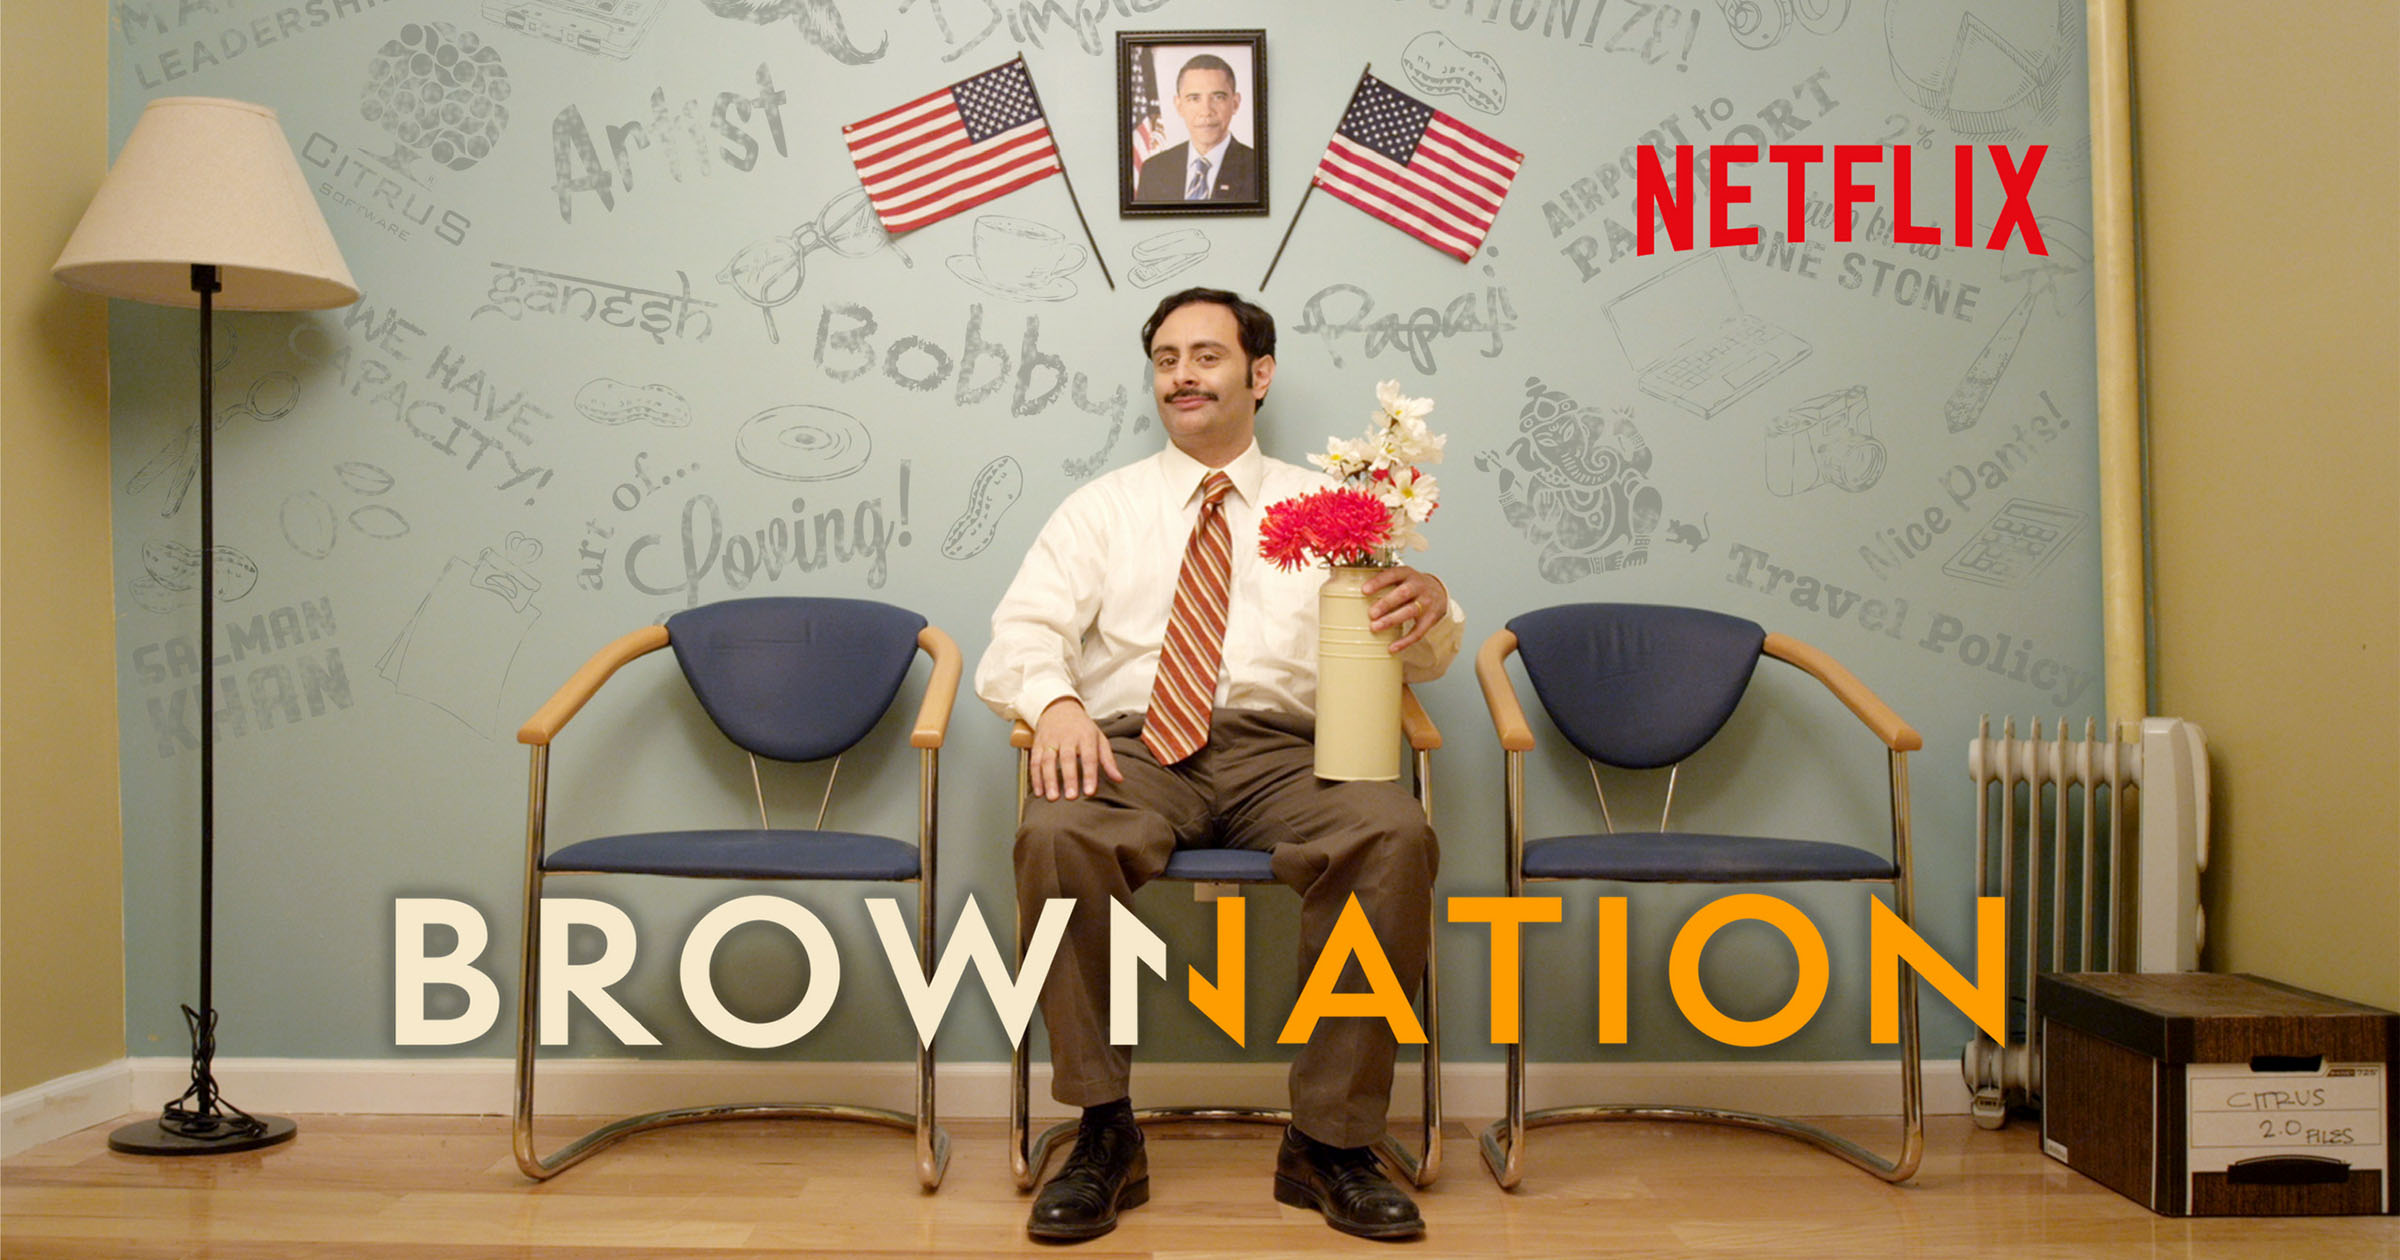 How Frame.io helped make Brown Nation a Netflix hit